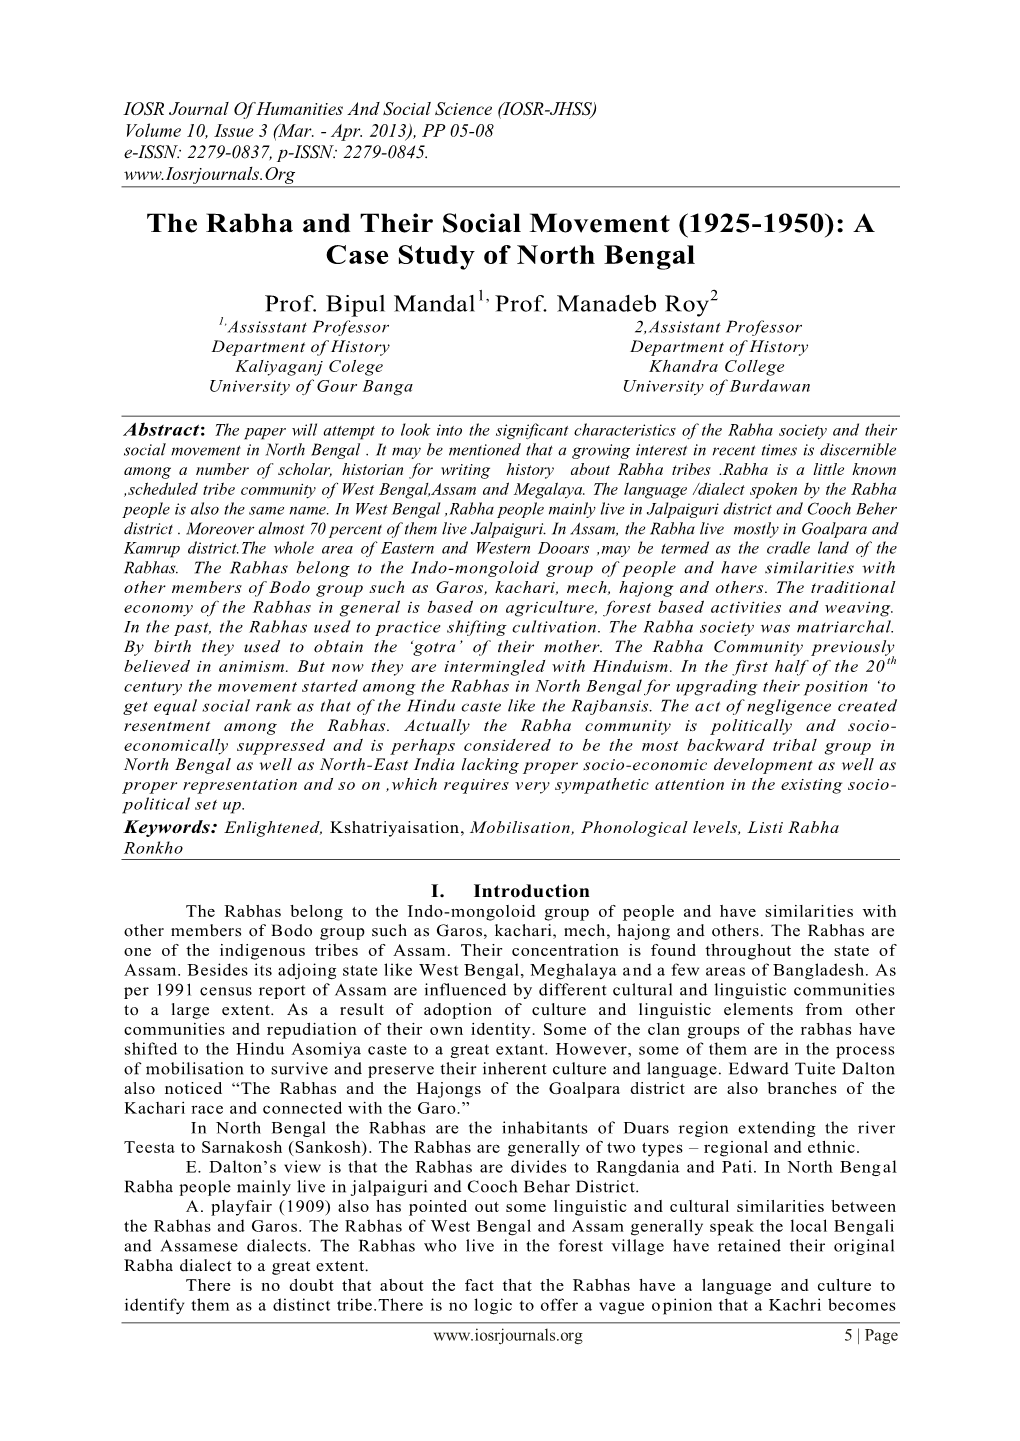 The Rabha and Their Social Movement (1925-1950): a Case Study of North Bengal